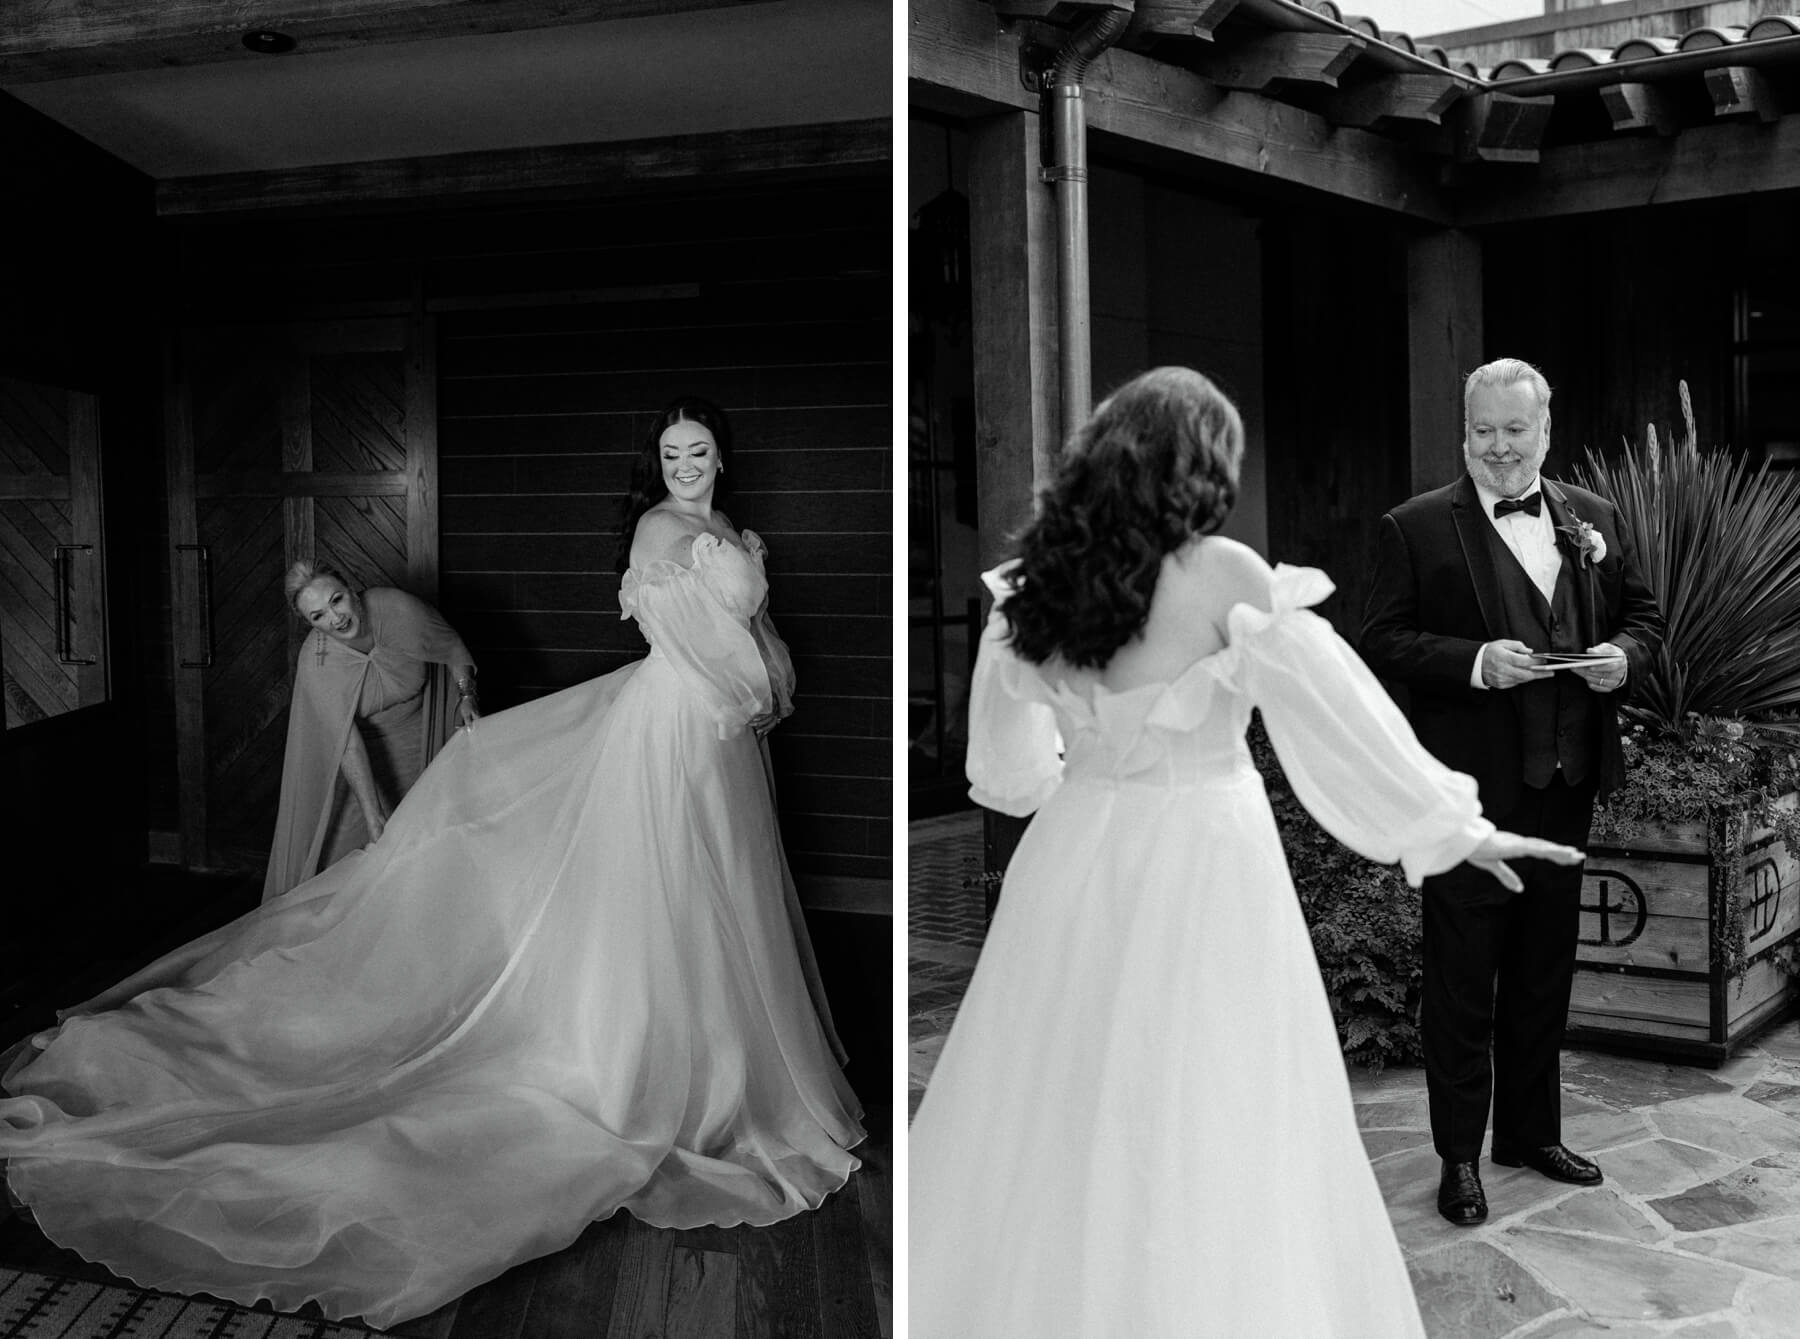 Mother of the bride fluffing bride's dress and father seeing bride for the first time before Hotel Drover wedding